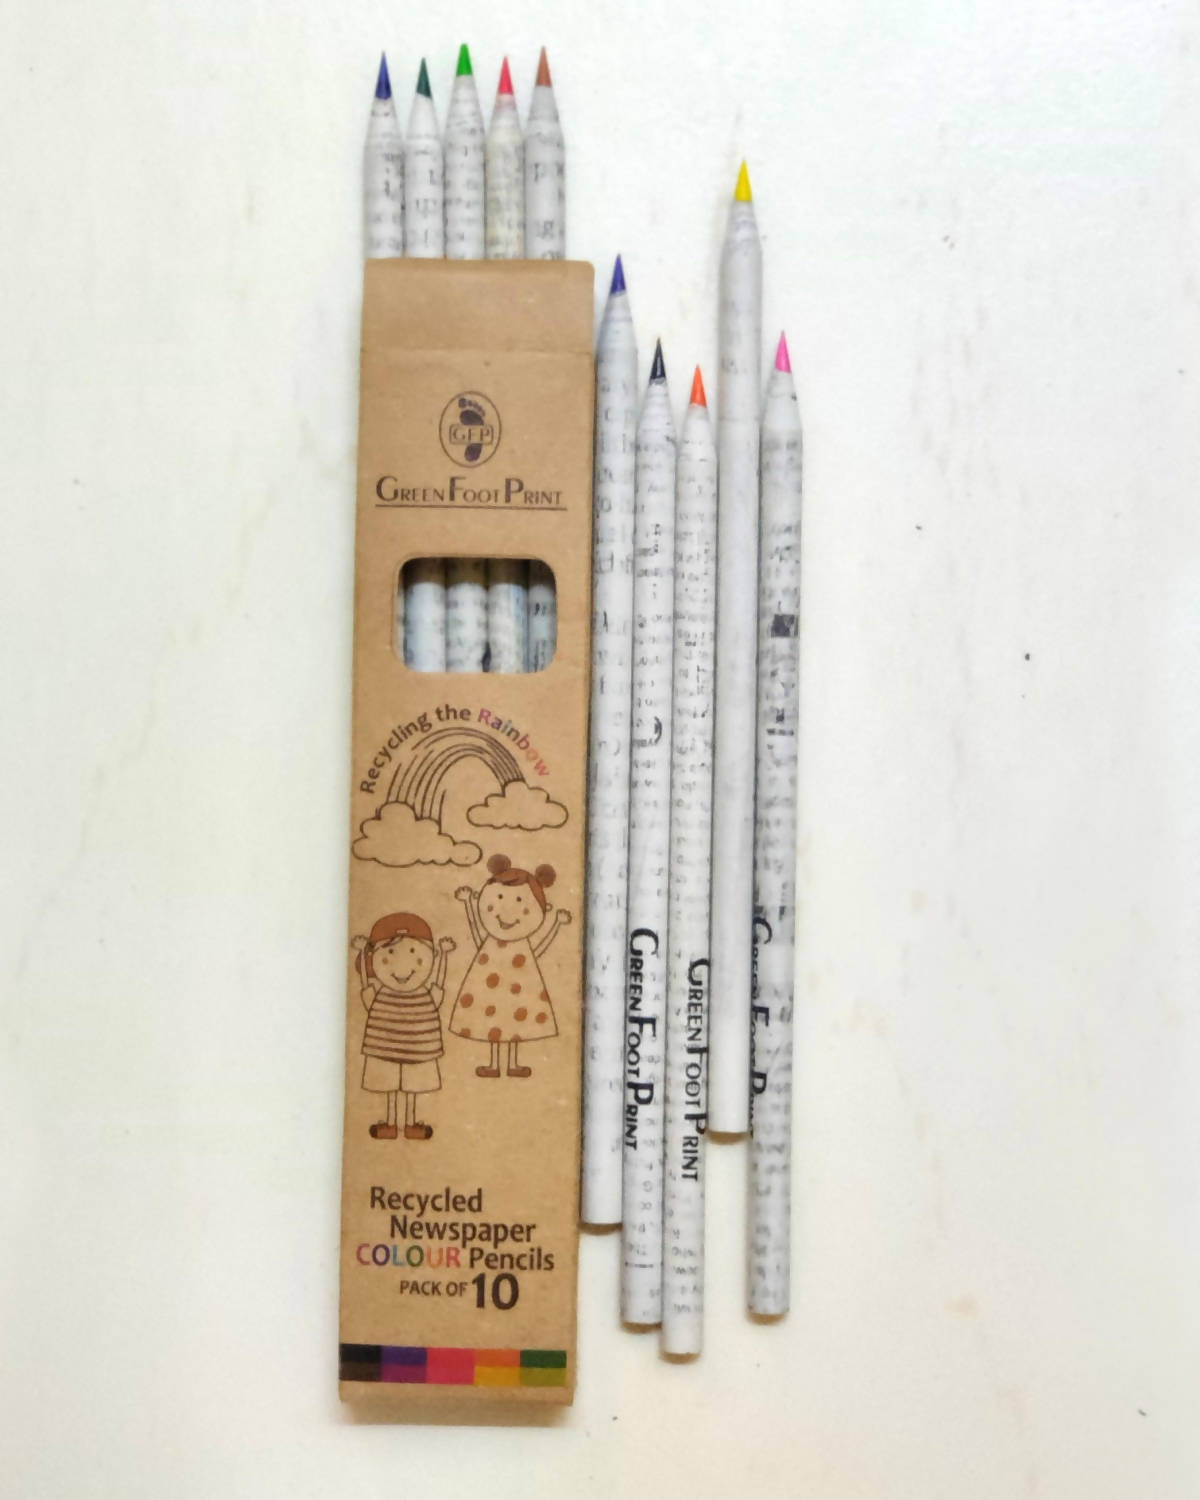 Recycled News paper COLOUR Pencils -Pack of 10 x2